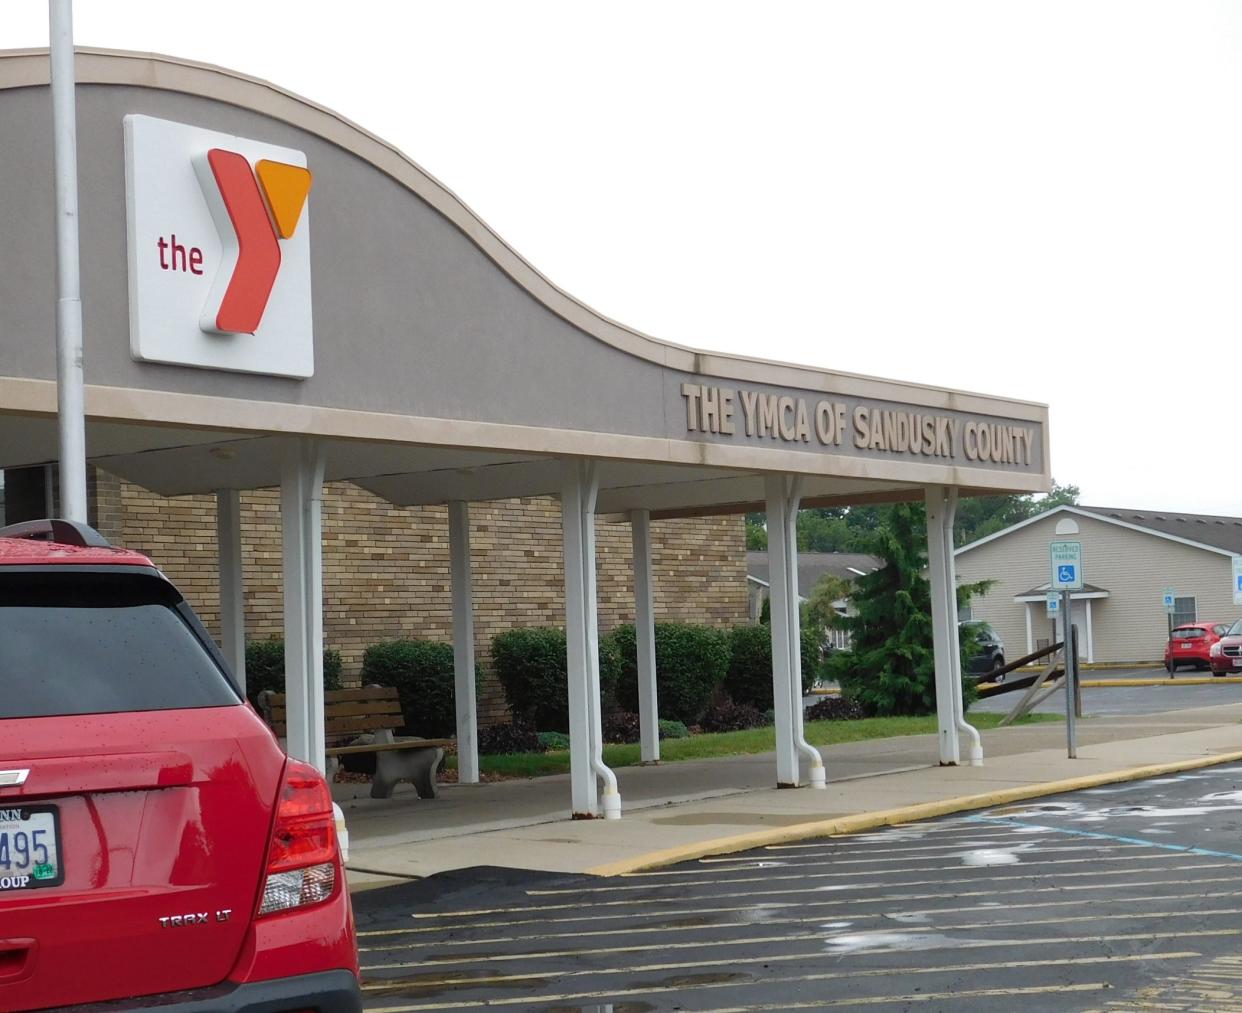 The YMCA of Sandusky County received a $20,000 grant to aid Ottawa County Seniors.